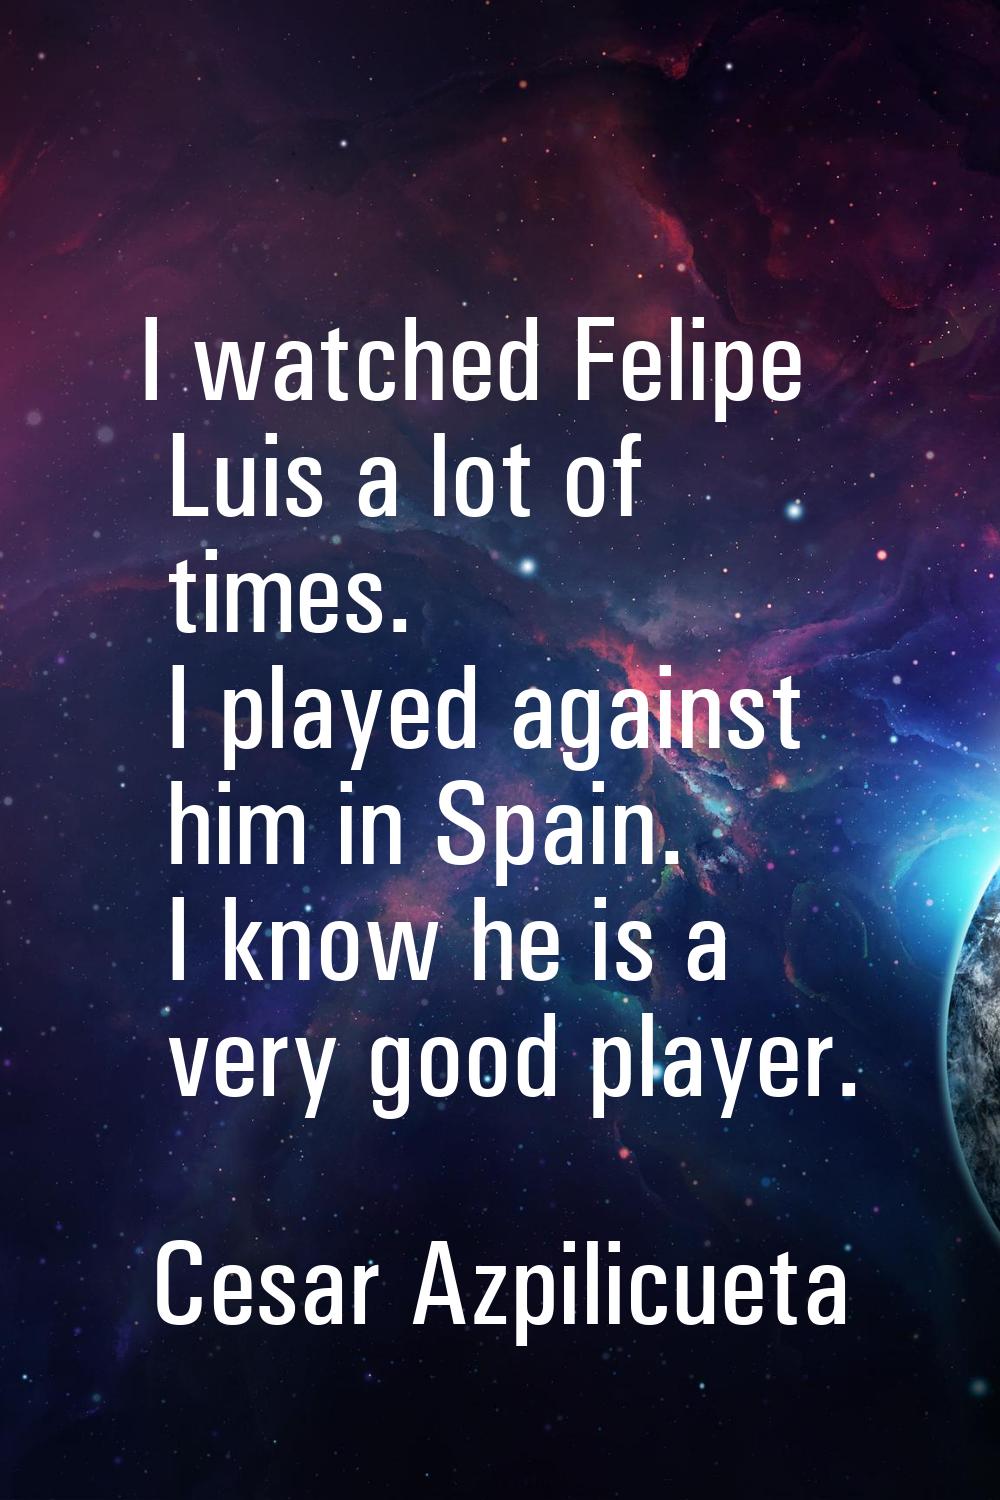 I watched Felipe Luis a lot of times. I played against him in Spain. I know he is a very good playe